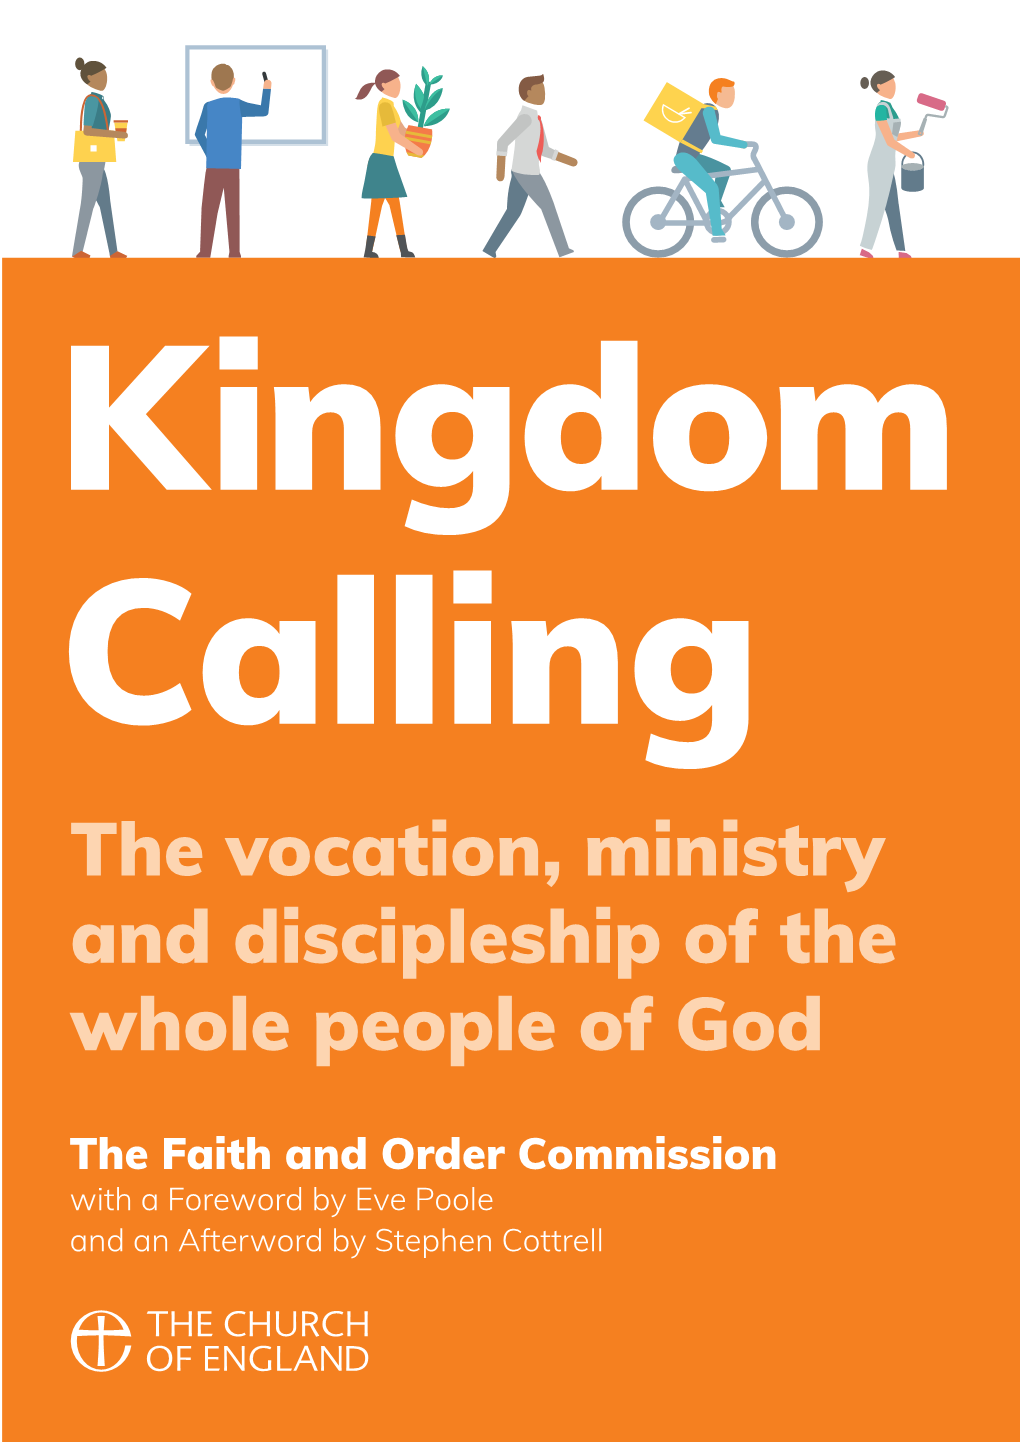 The Vocation, Ministry and Discipleship of the Whole People of God